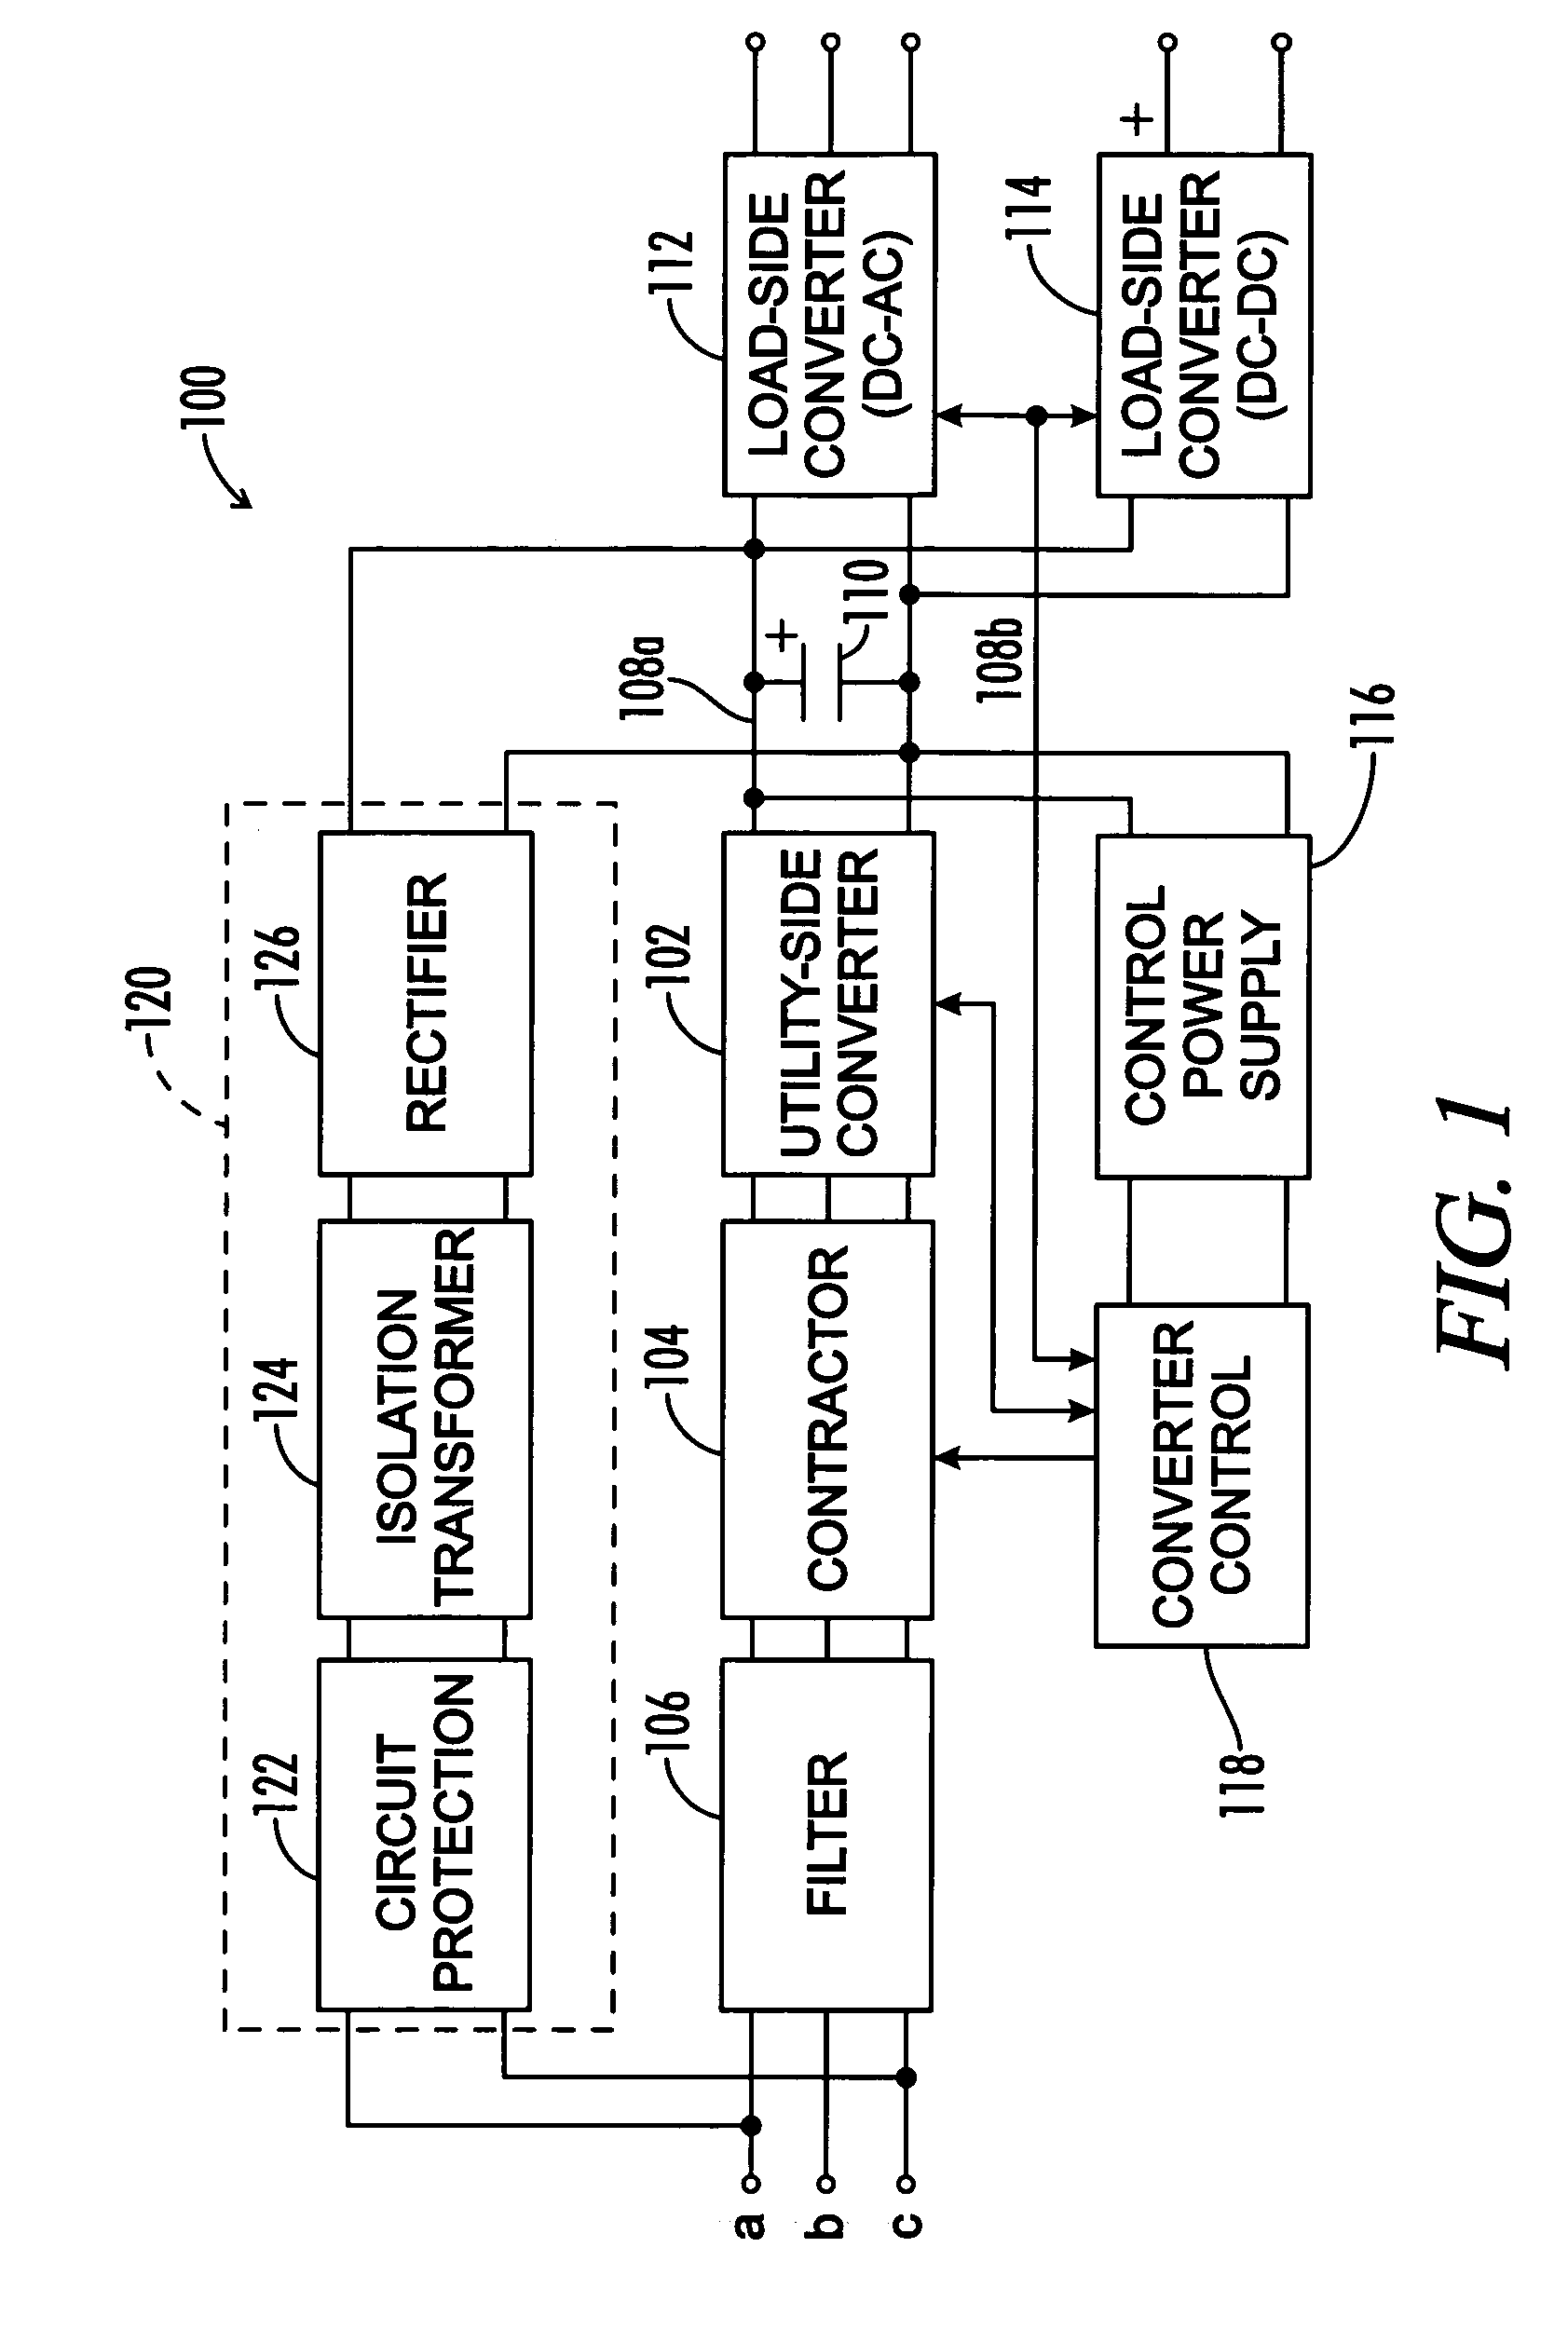 System and method for pre-charging the DC bus of a utility connected power converter